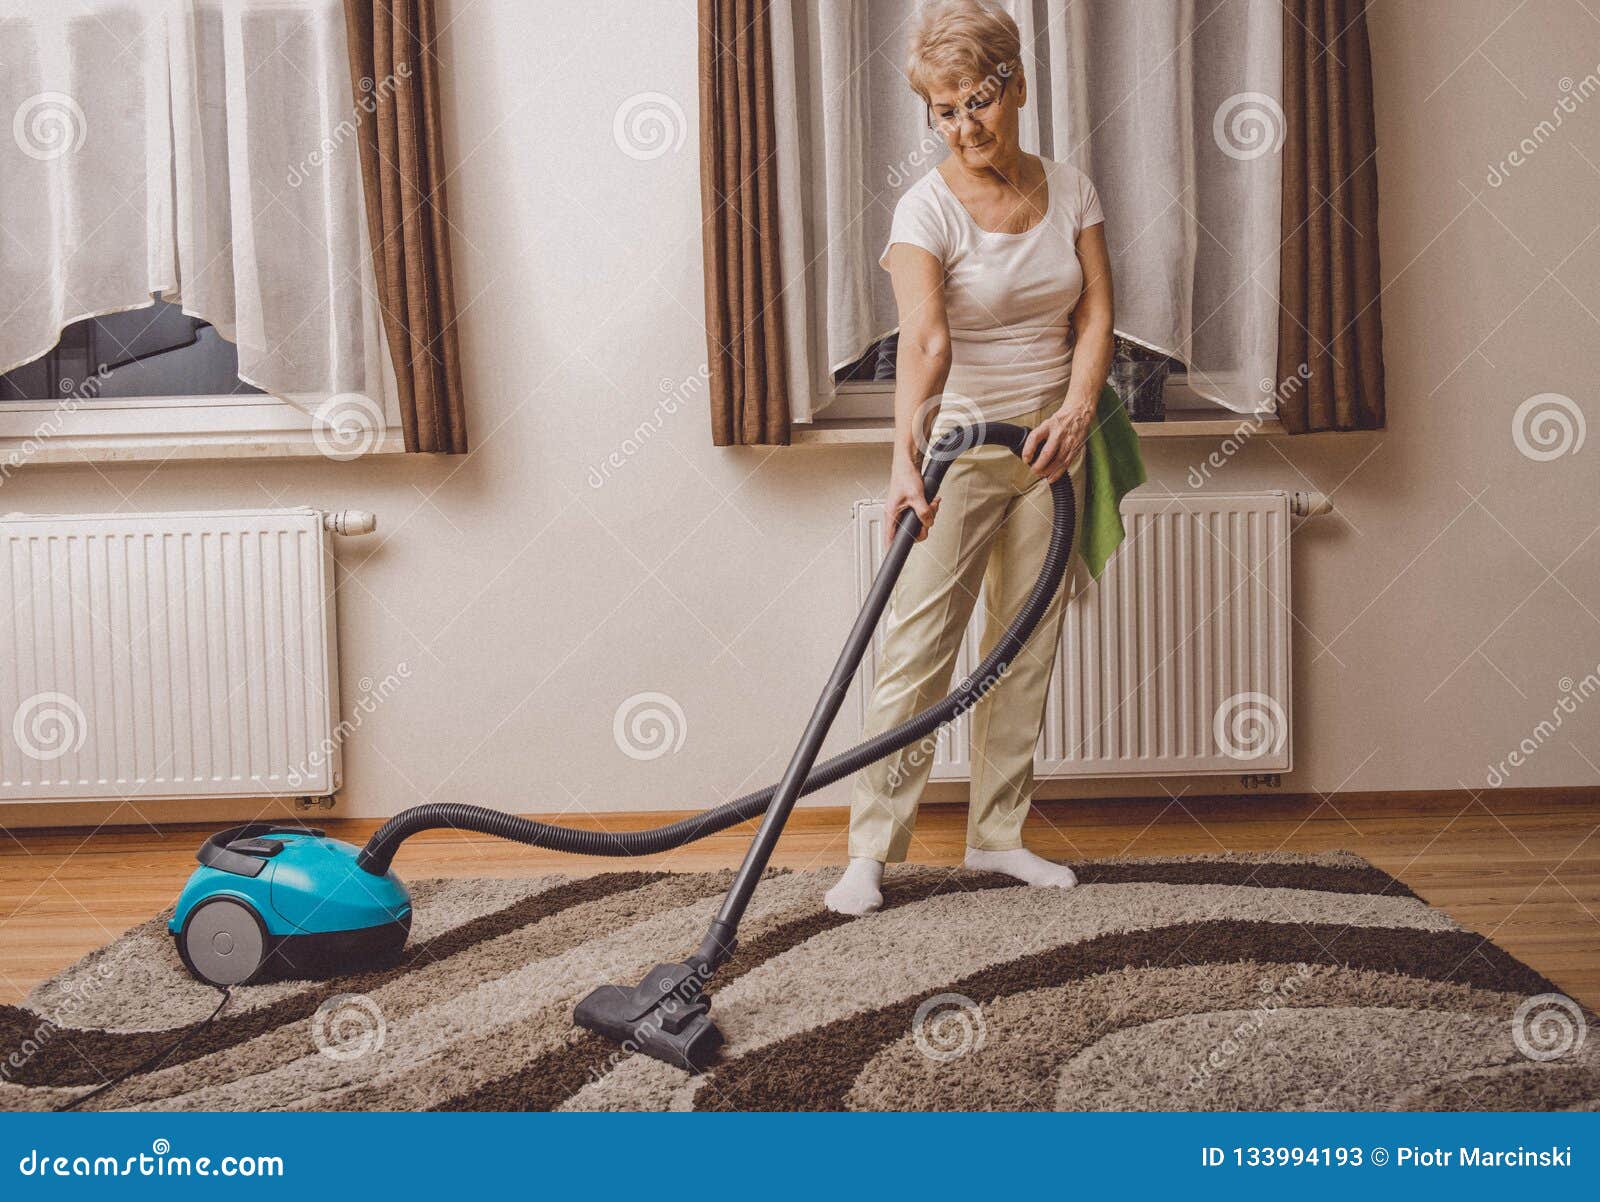 elderly woman doing woman chores at home. vacumming the carpet